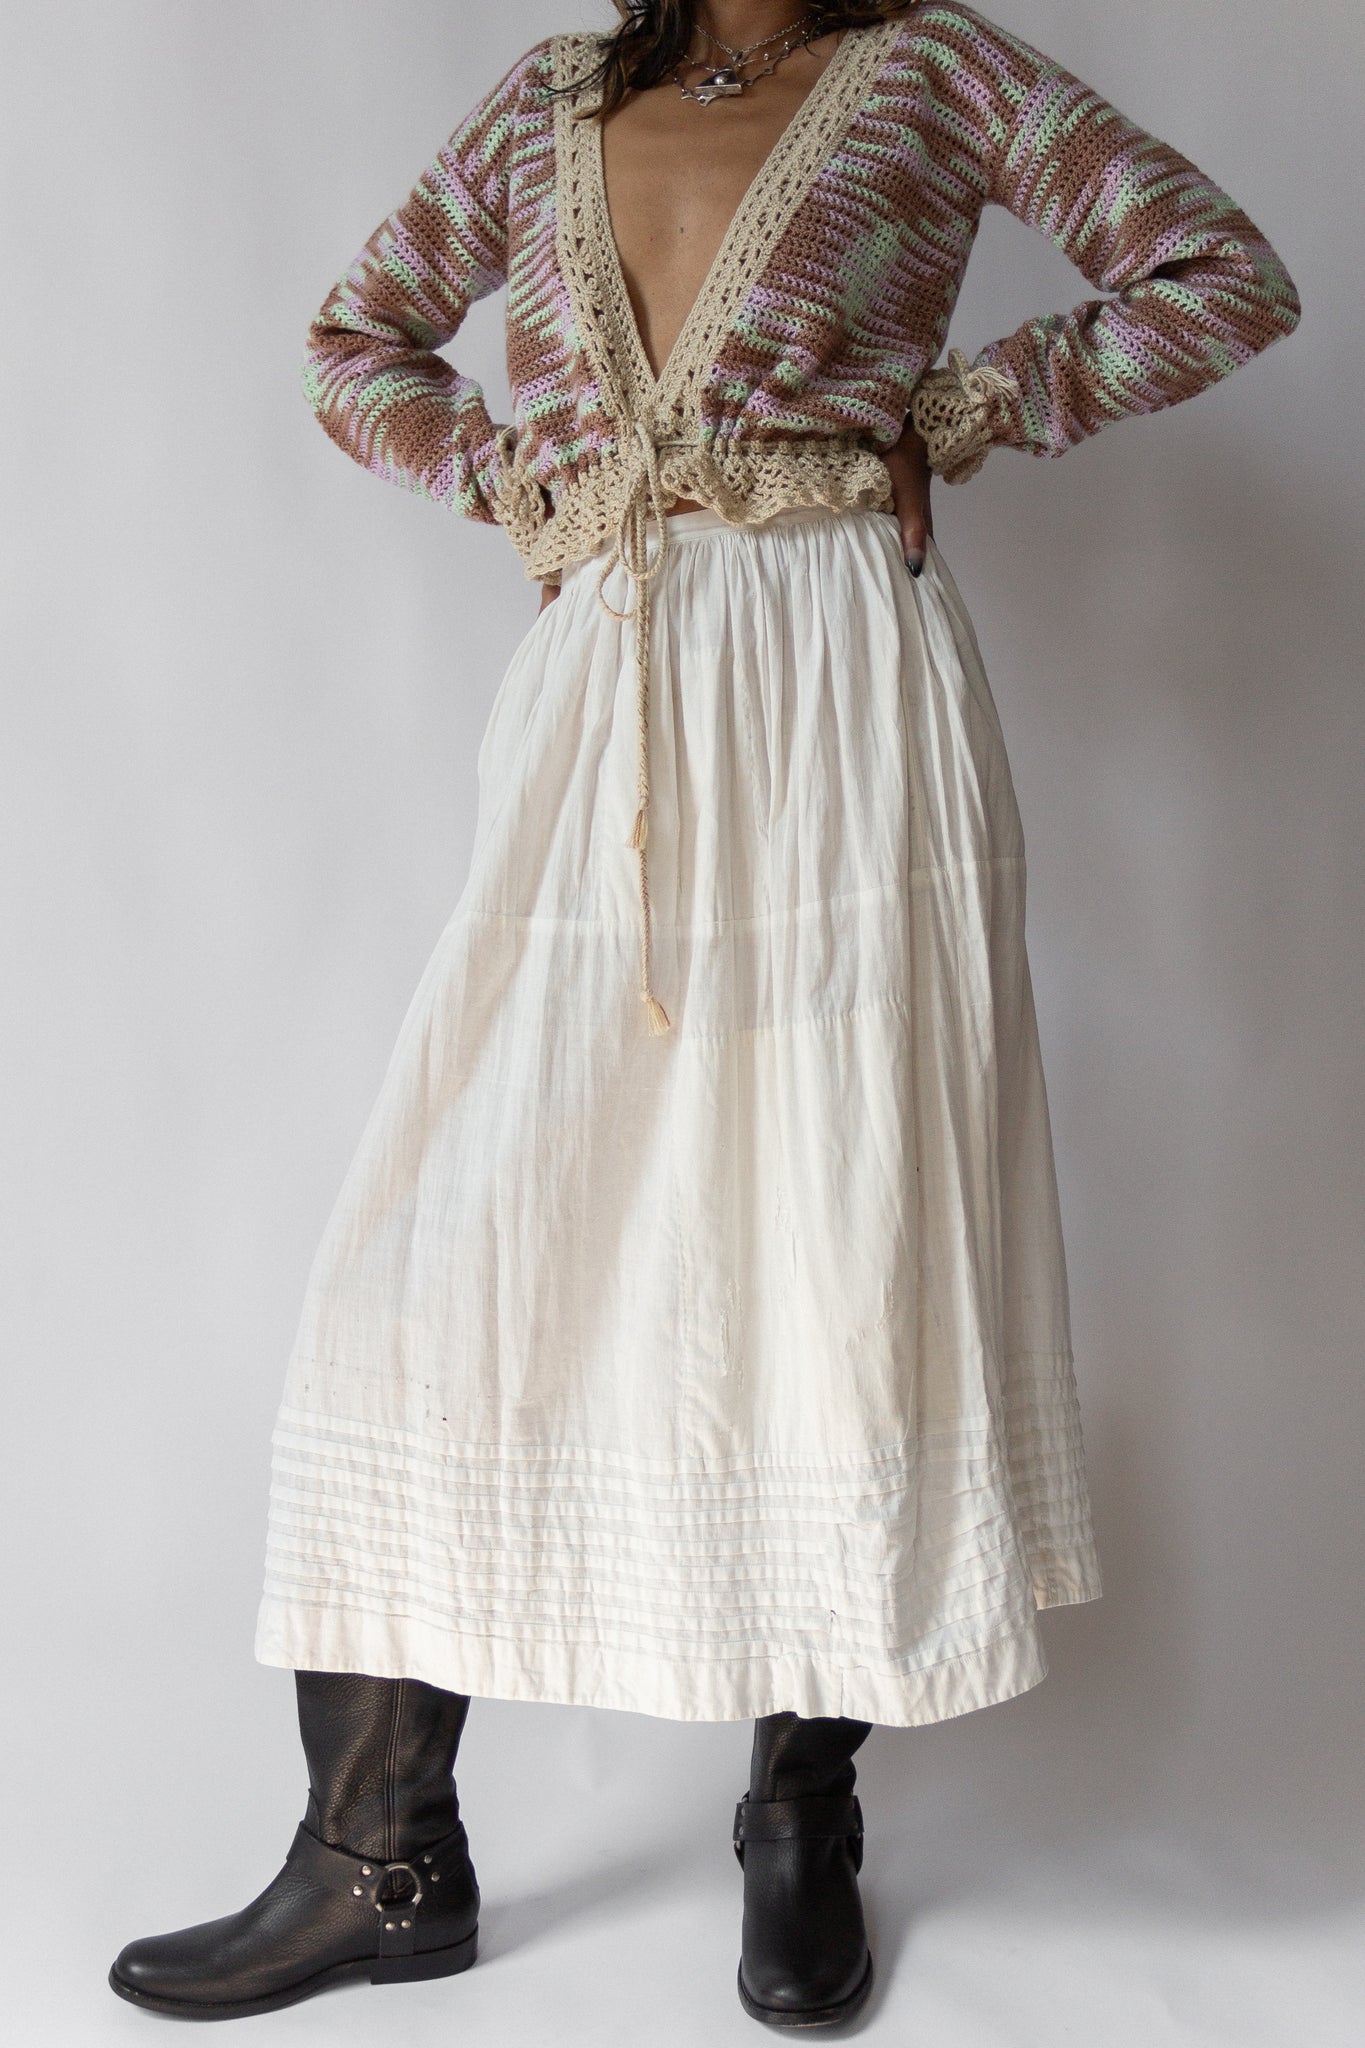 Victorian Patched Cotton Petticoat